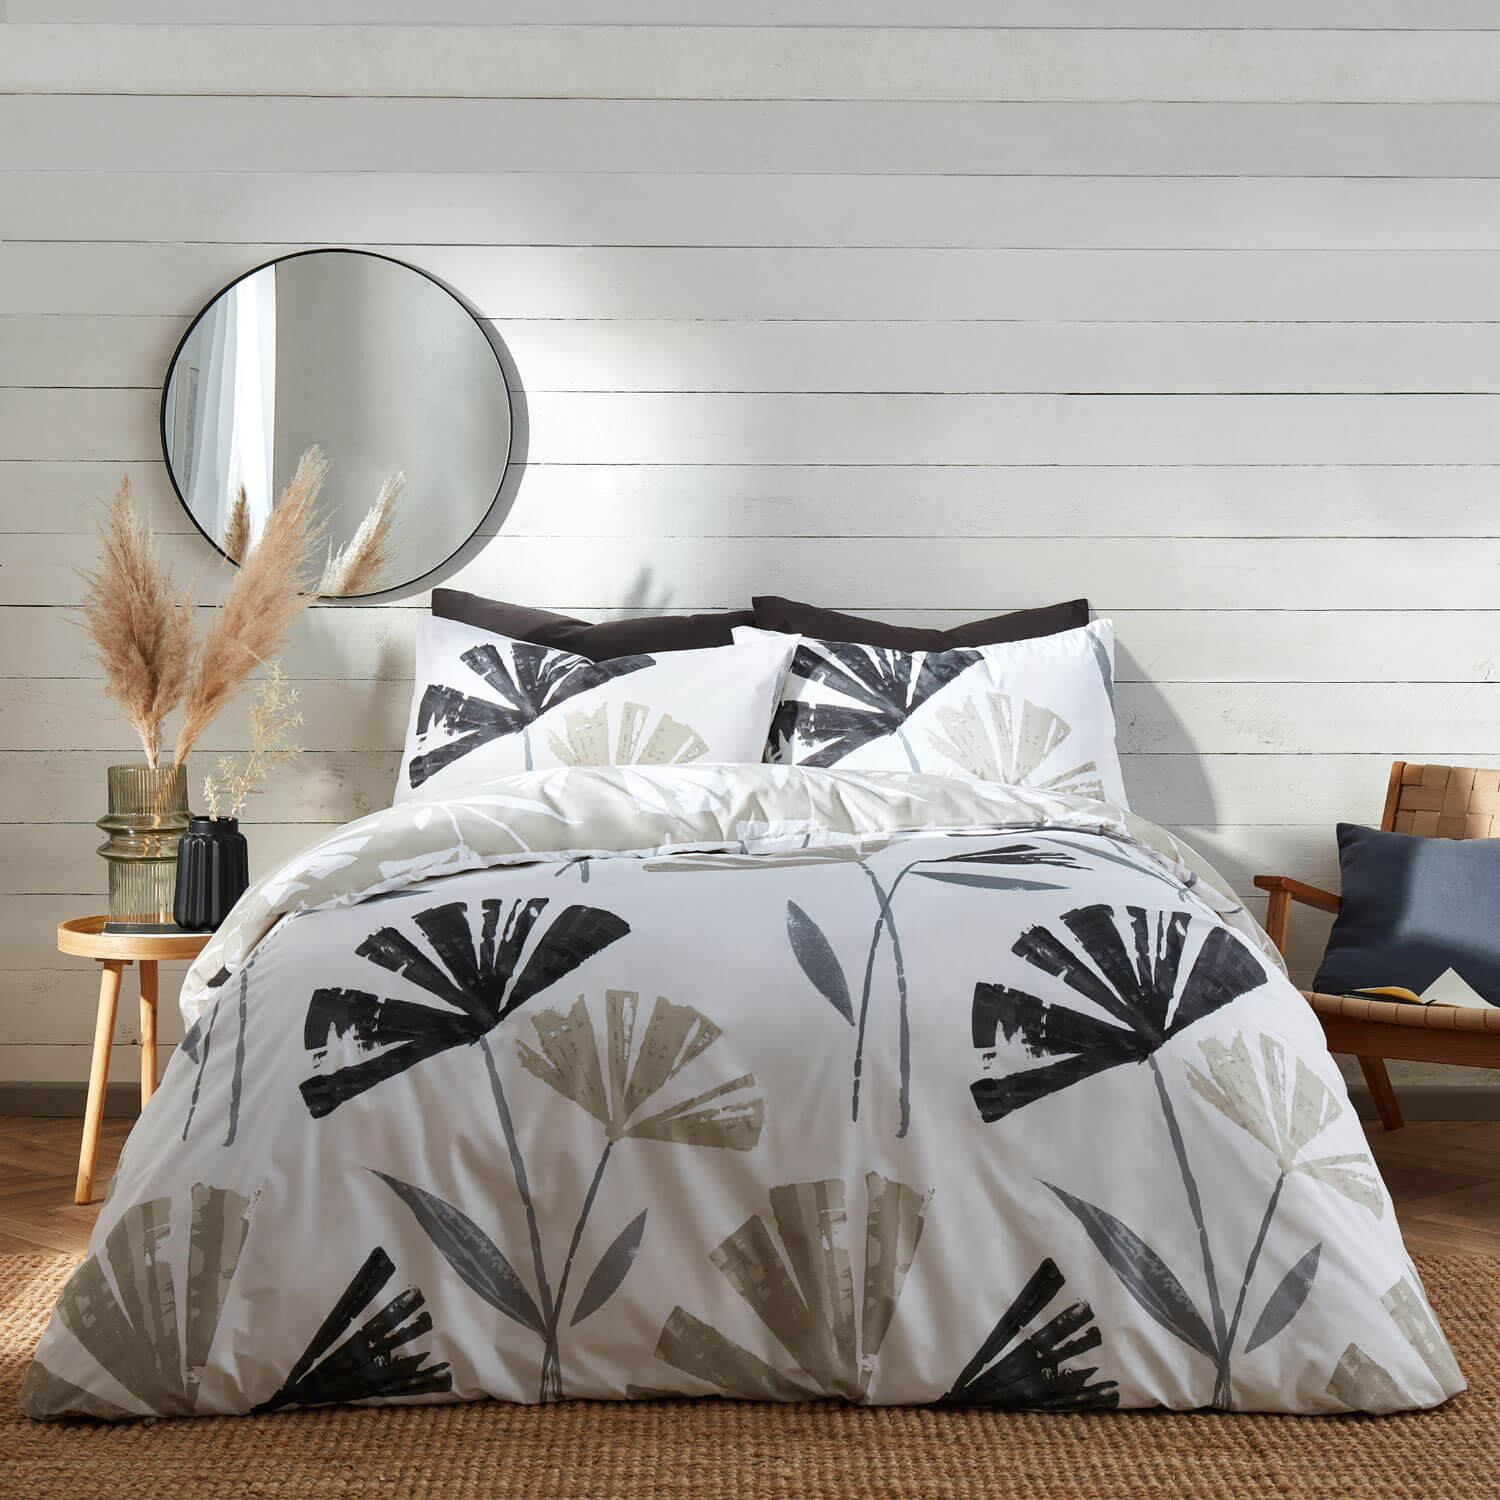  The Home Collection Skandi Duvet Cover Set - Black / Natural 1 Shaws Department Stores